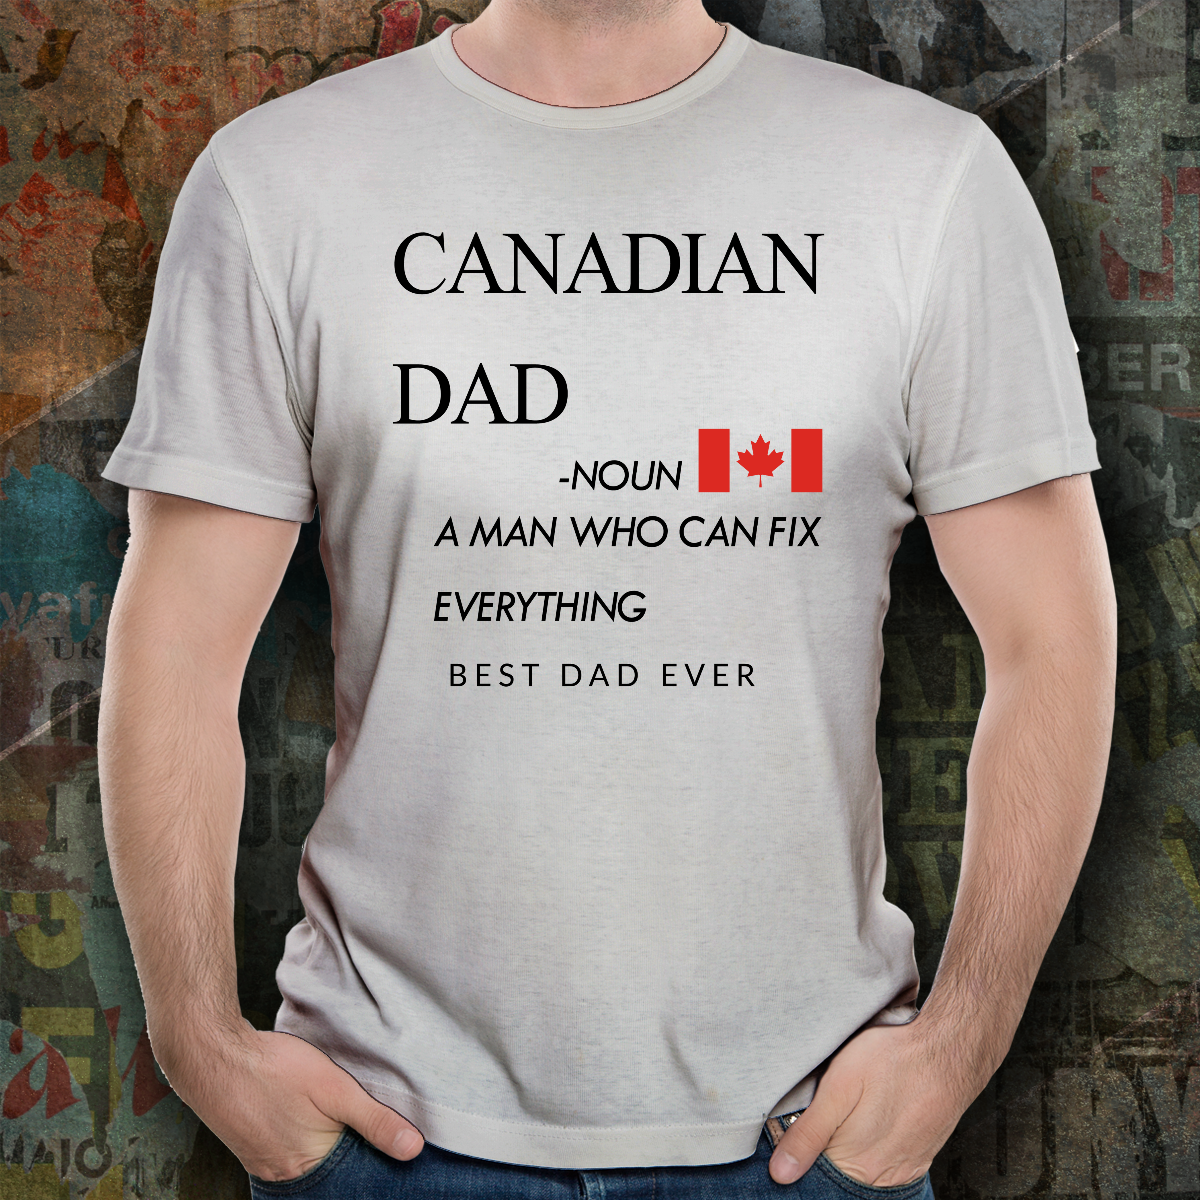 Father's Day Gift 2020, Custom T-Shirt Personalized Gift For Dad!